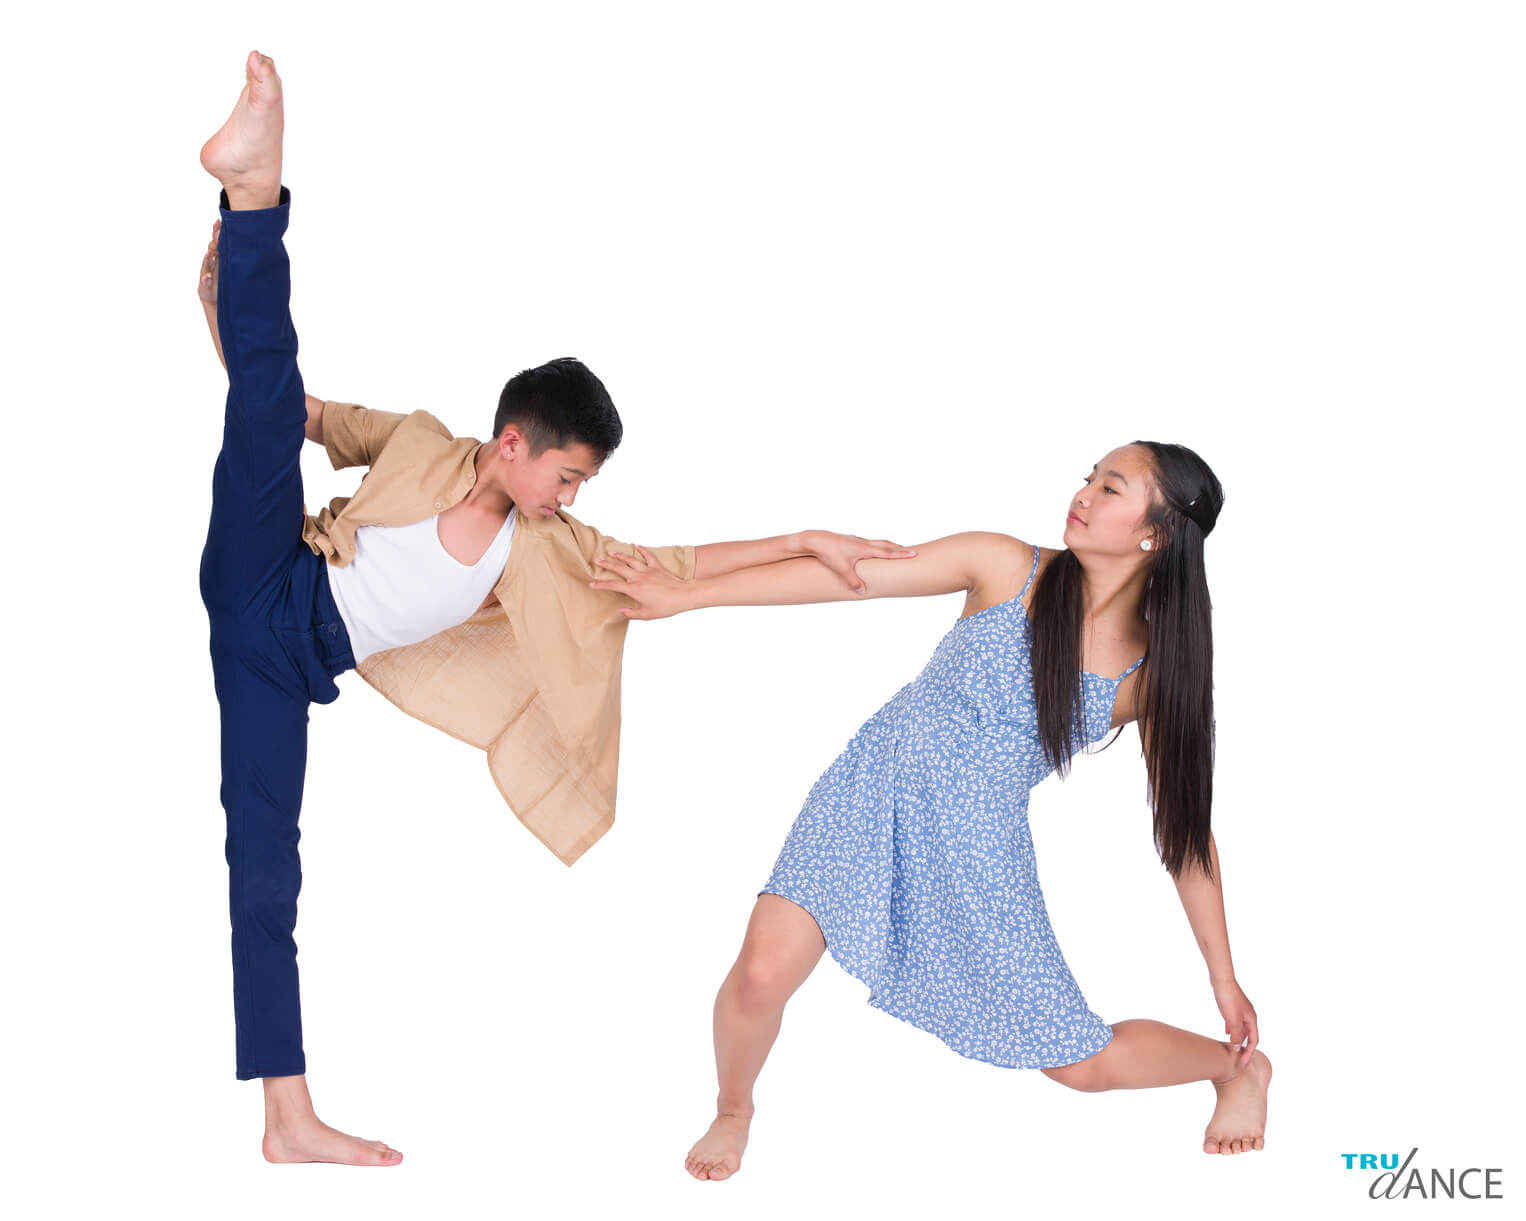 Dance studio photography, serving individuals and dance teams throughout California. We shoot on location or in our San Rafael, California photography studio